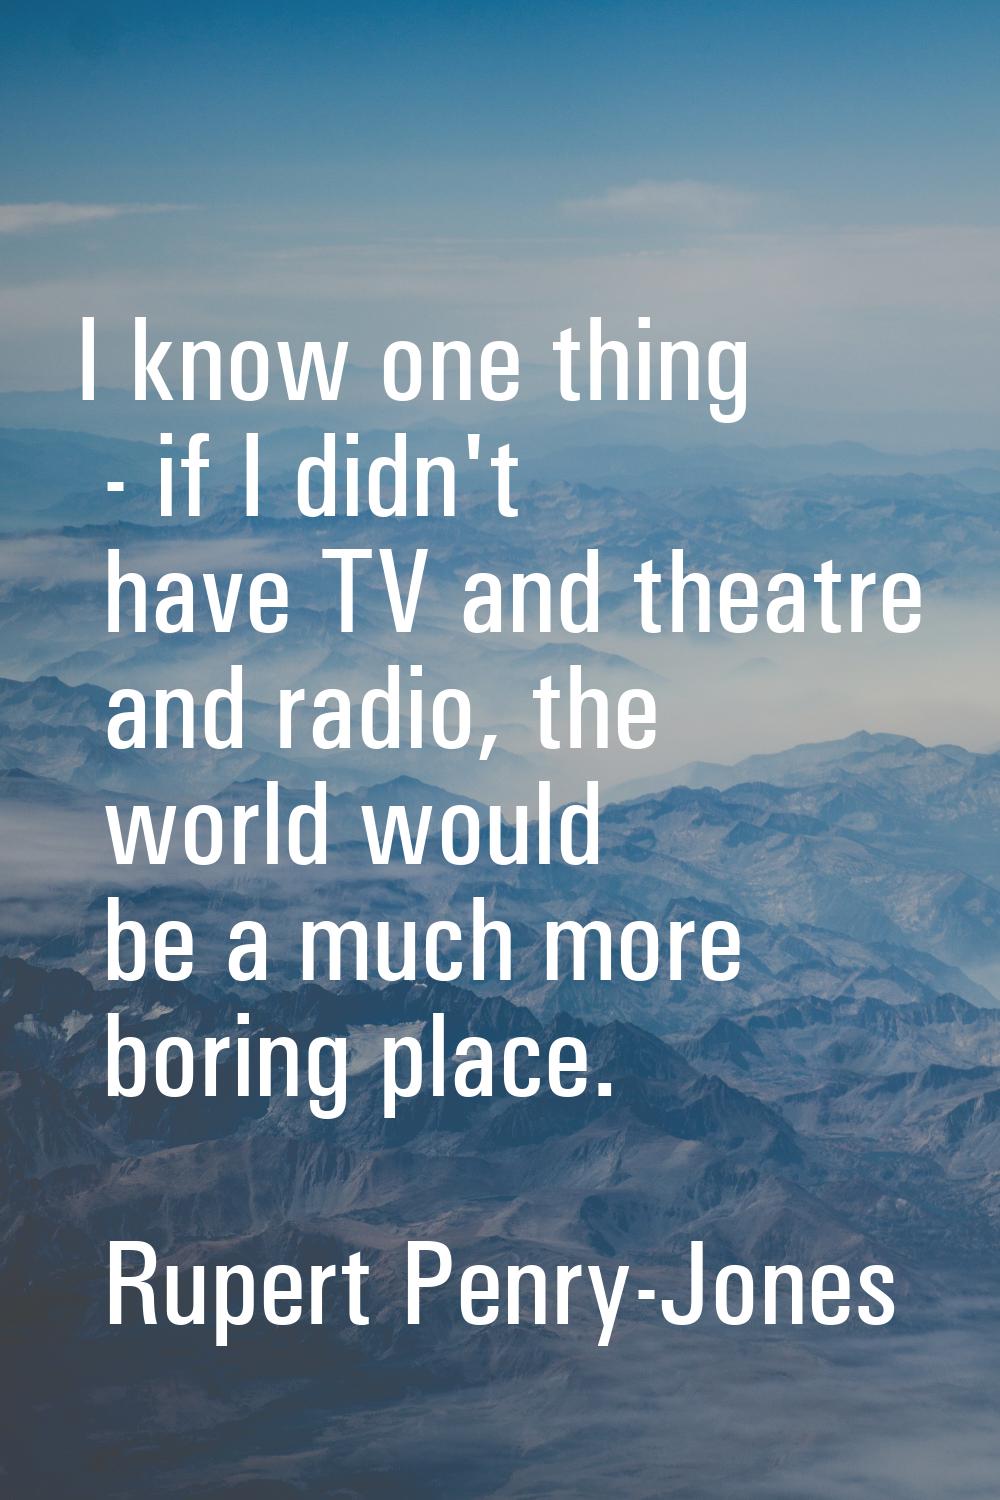 I know one thing - if I didn't have TV and theatre and radio, the world would be a much more boring